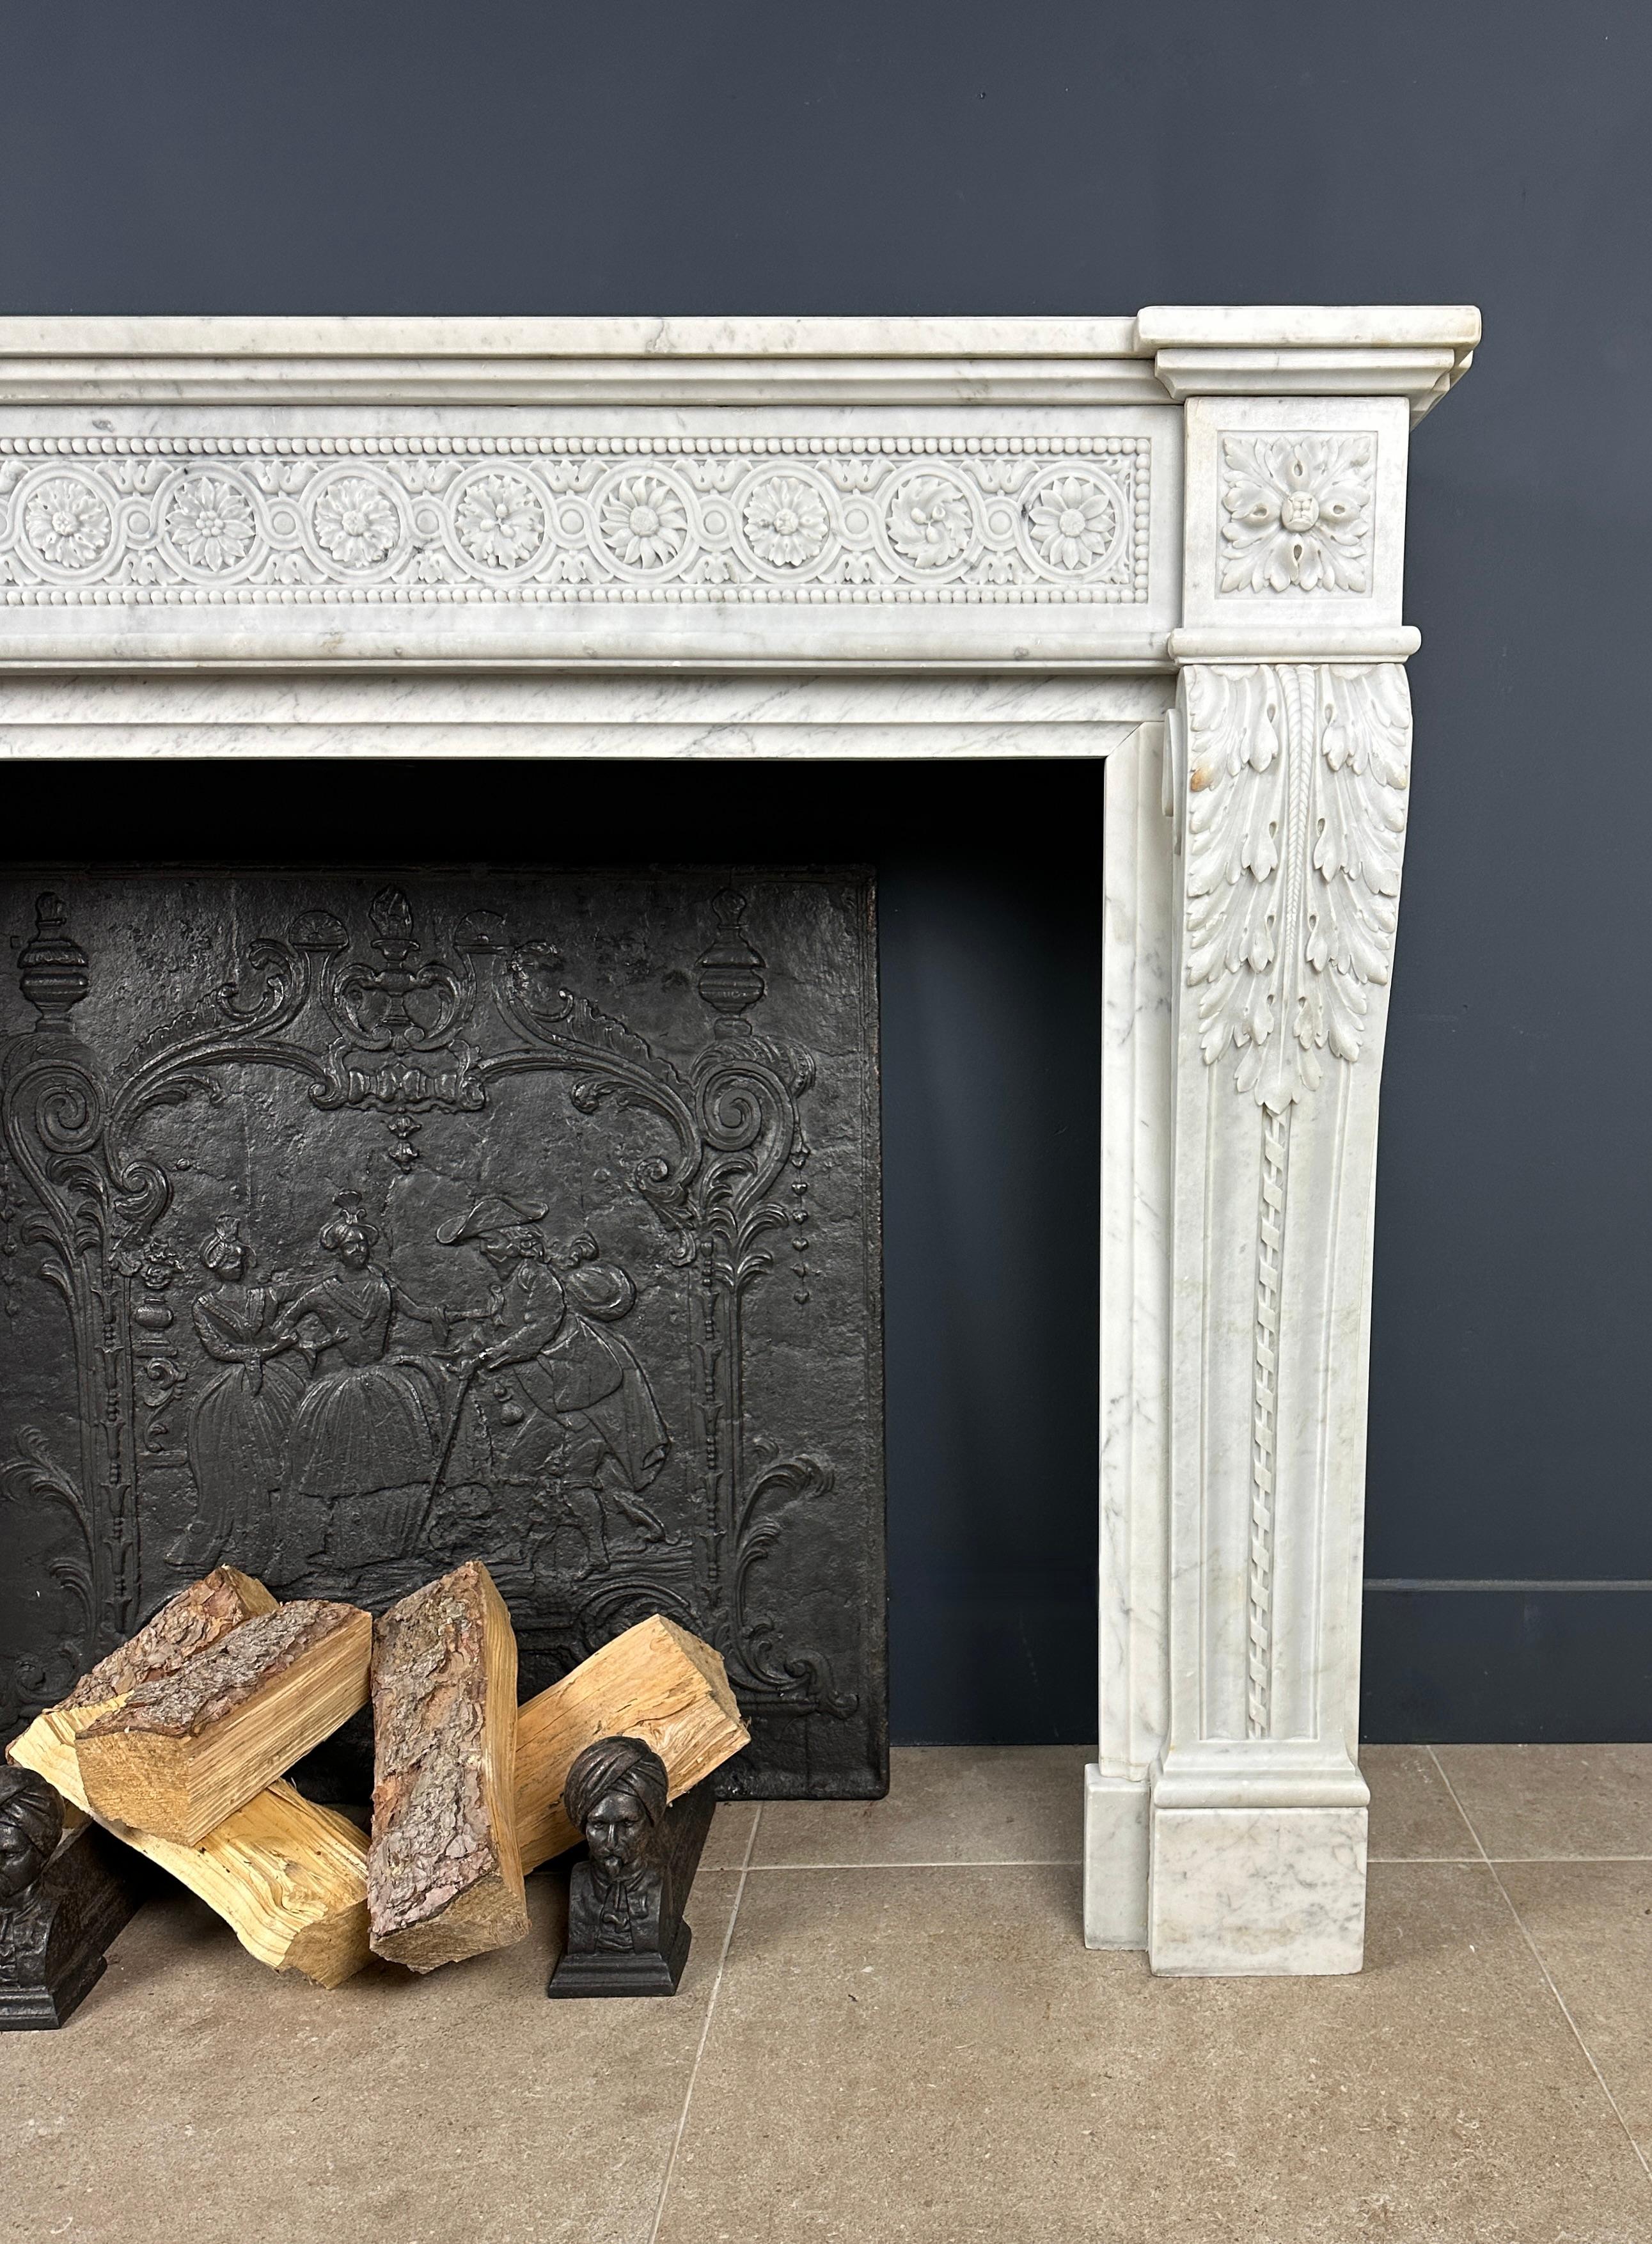 Timeless elegance exudes from this Beautiful French Antique Louis XV Front Fireplace in Carrara Marble. The meticulously profiled front of this fireplace is a masterpiece in itself, with refined details that highlight its stylish appeal.

The